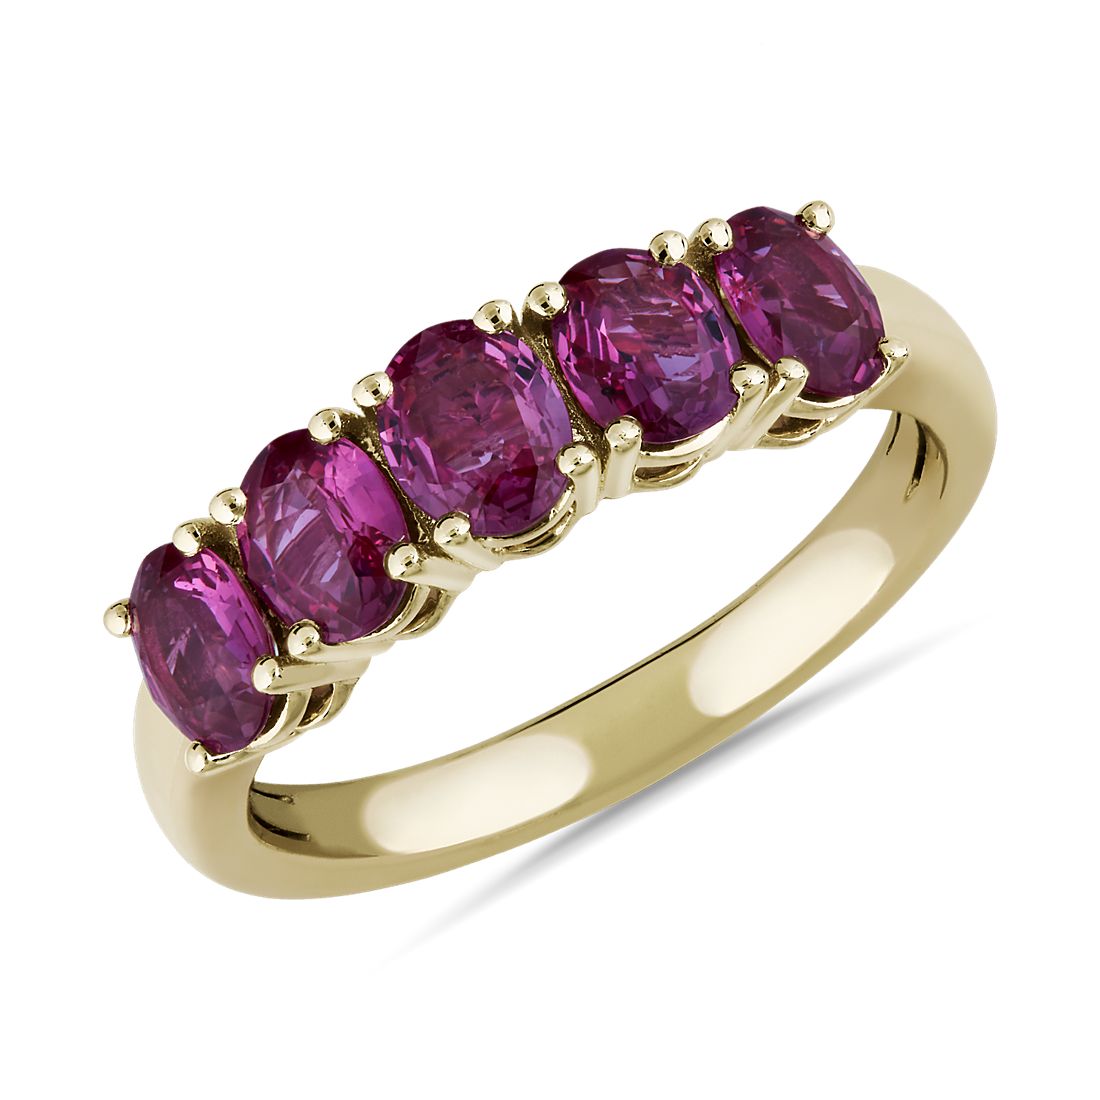 5-Stone Oval Ruby Ring in 14k Yellow Gold (5x4mm)